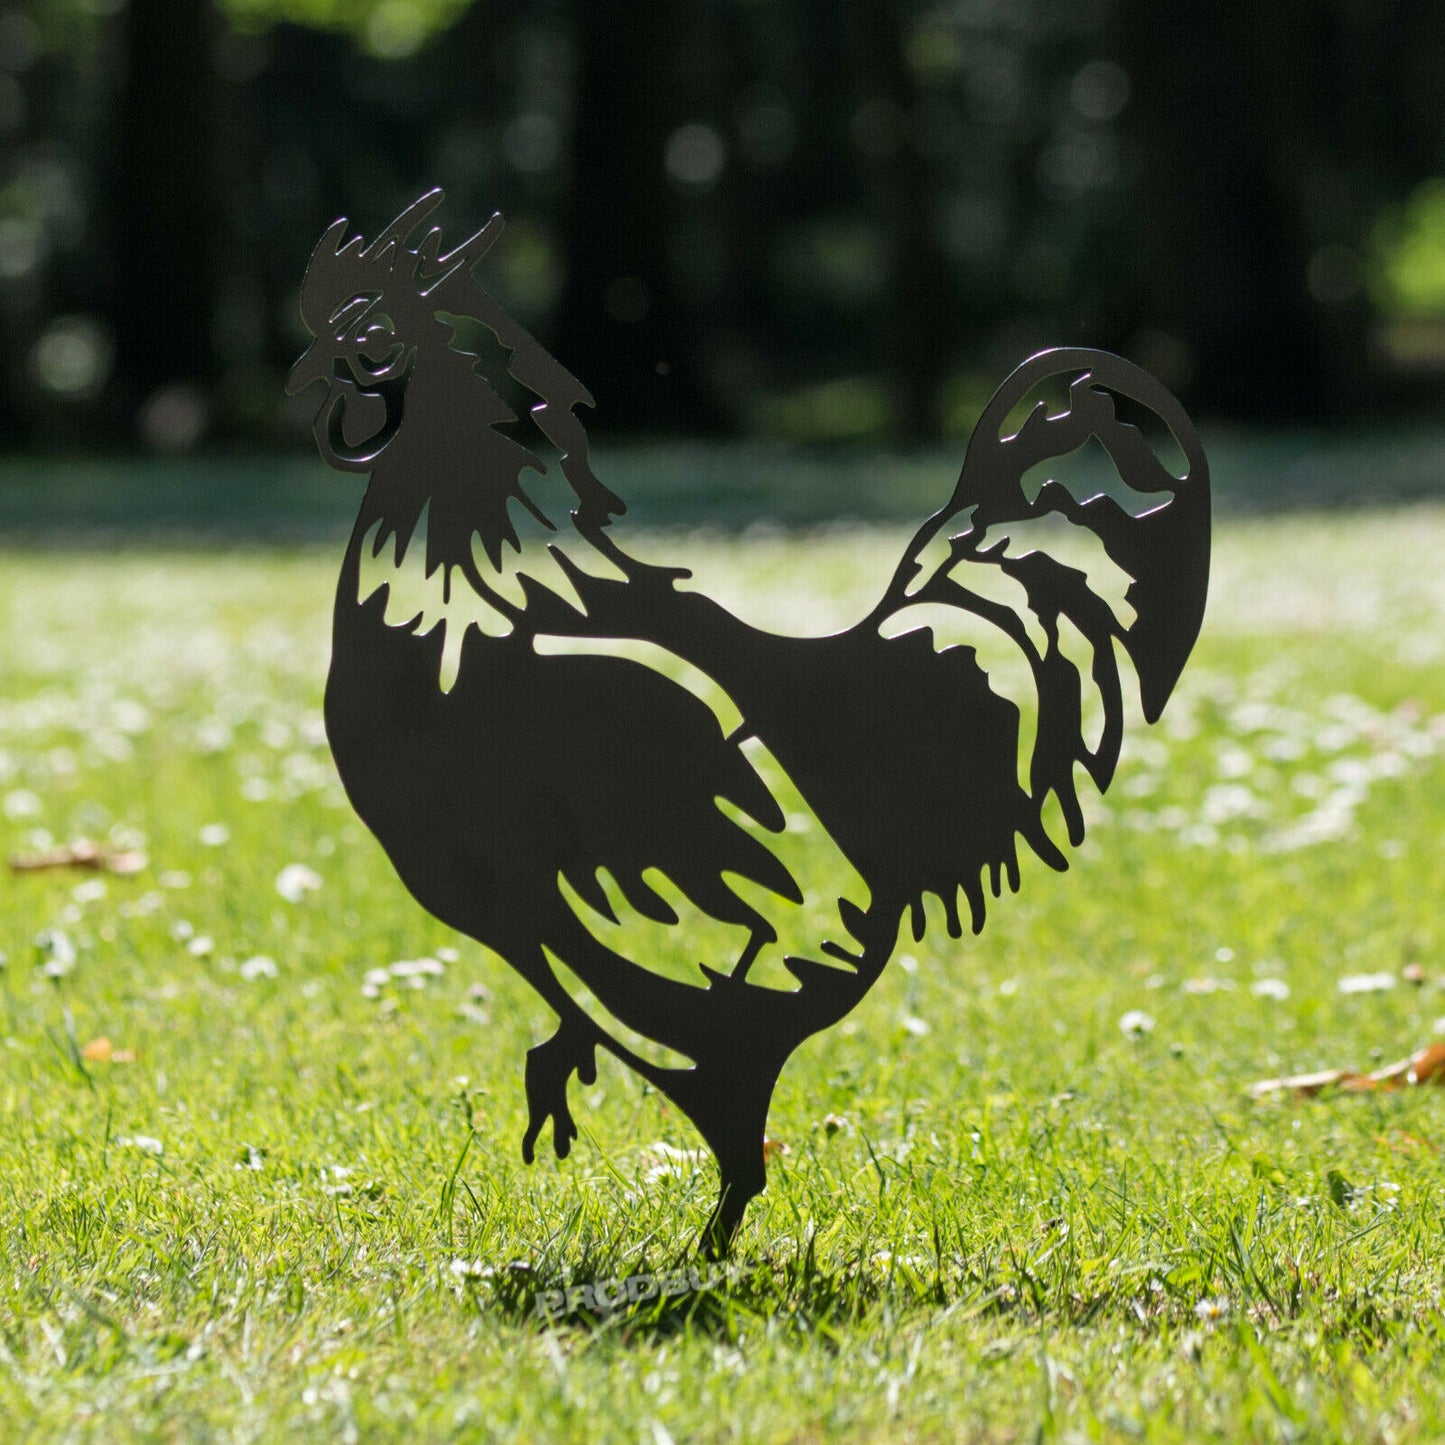 Black Garden Rooster Silhouette Stake Ornament